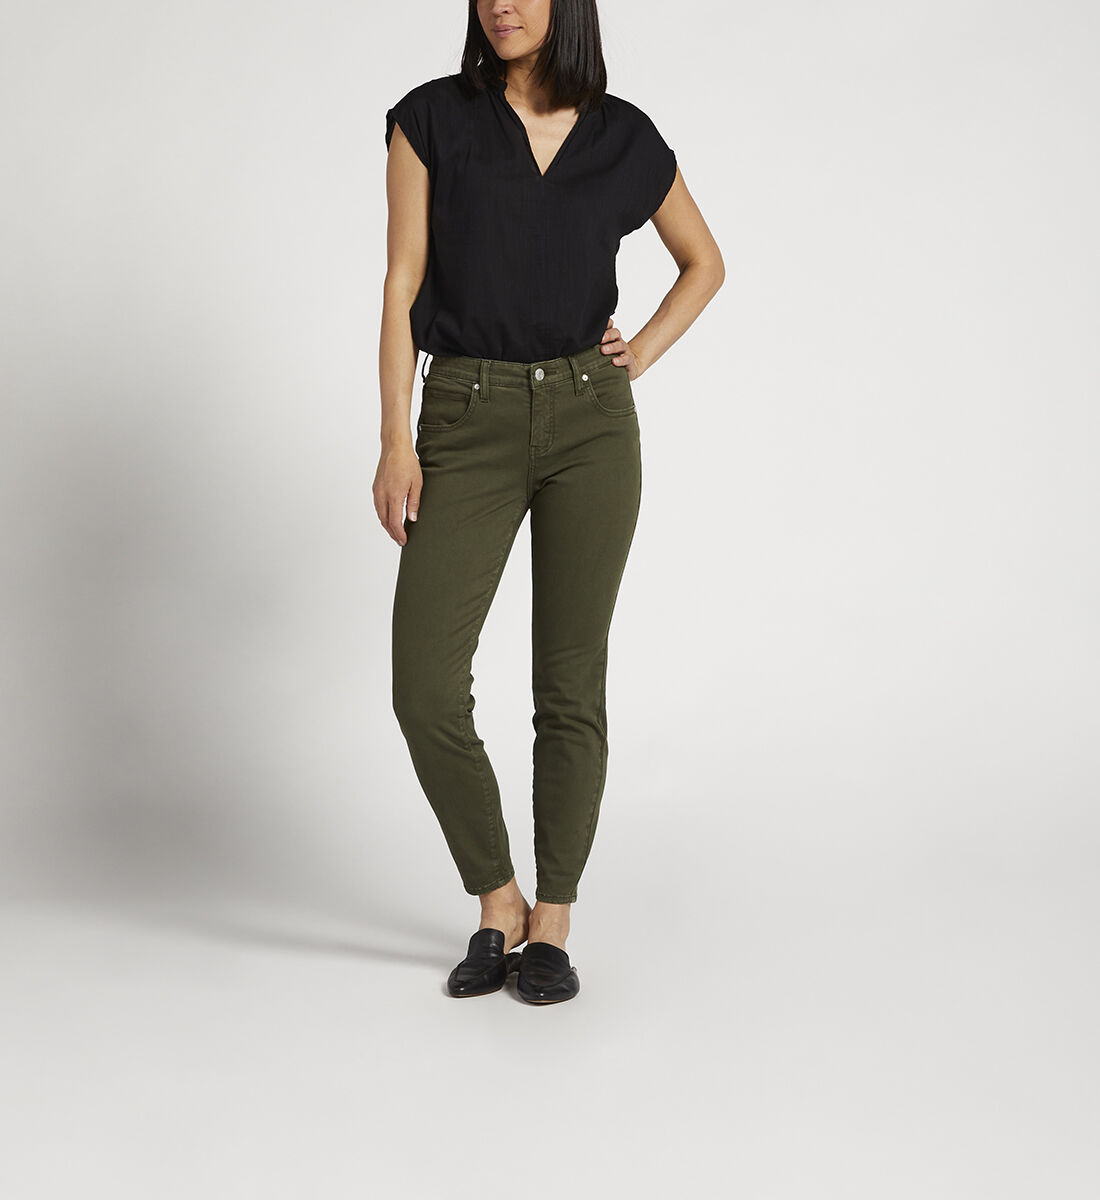 Buy Cecilia Mid Rise Skinny Pants for USD 44.00 | Jag Jeans US New